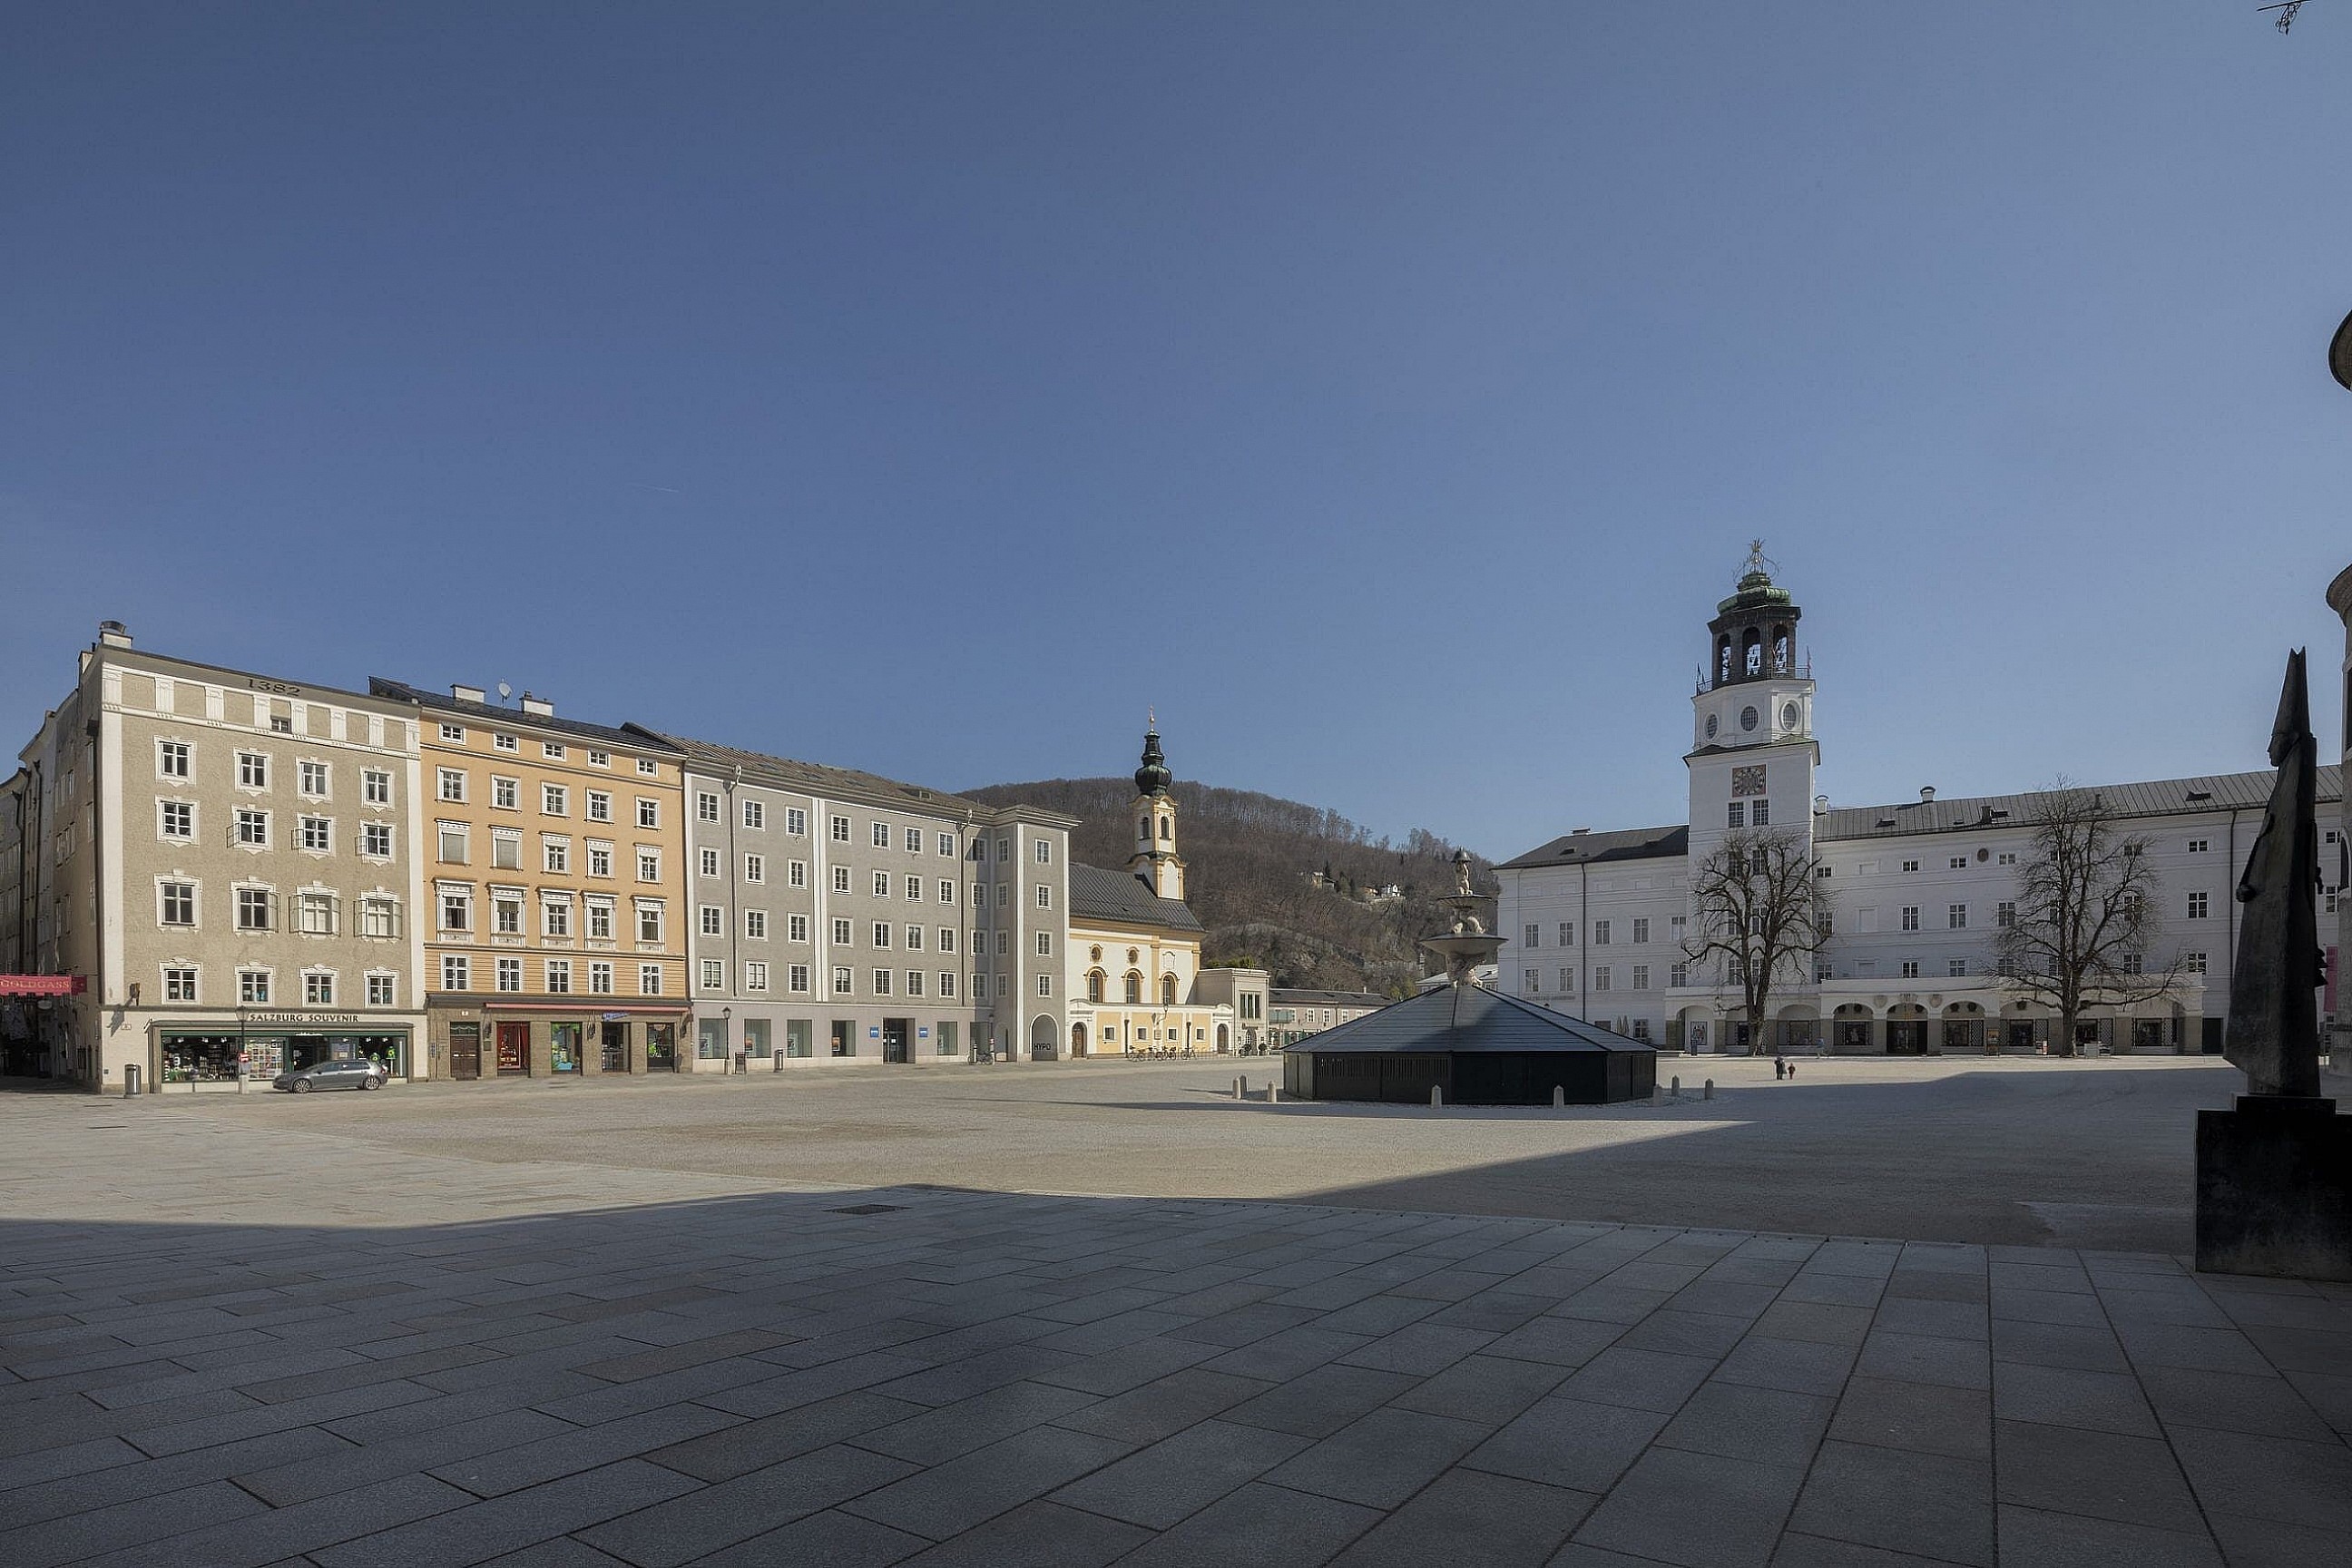 A quiet and empty Residenzplatz, Salzburg during corona virus lockdown. Showing the fountain and surrounding shops and museums all shut down